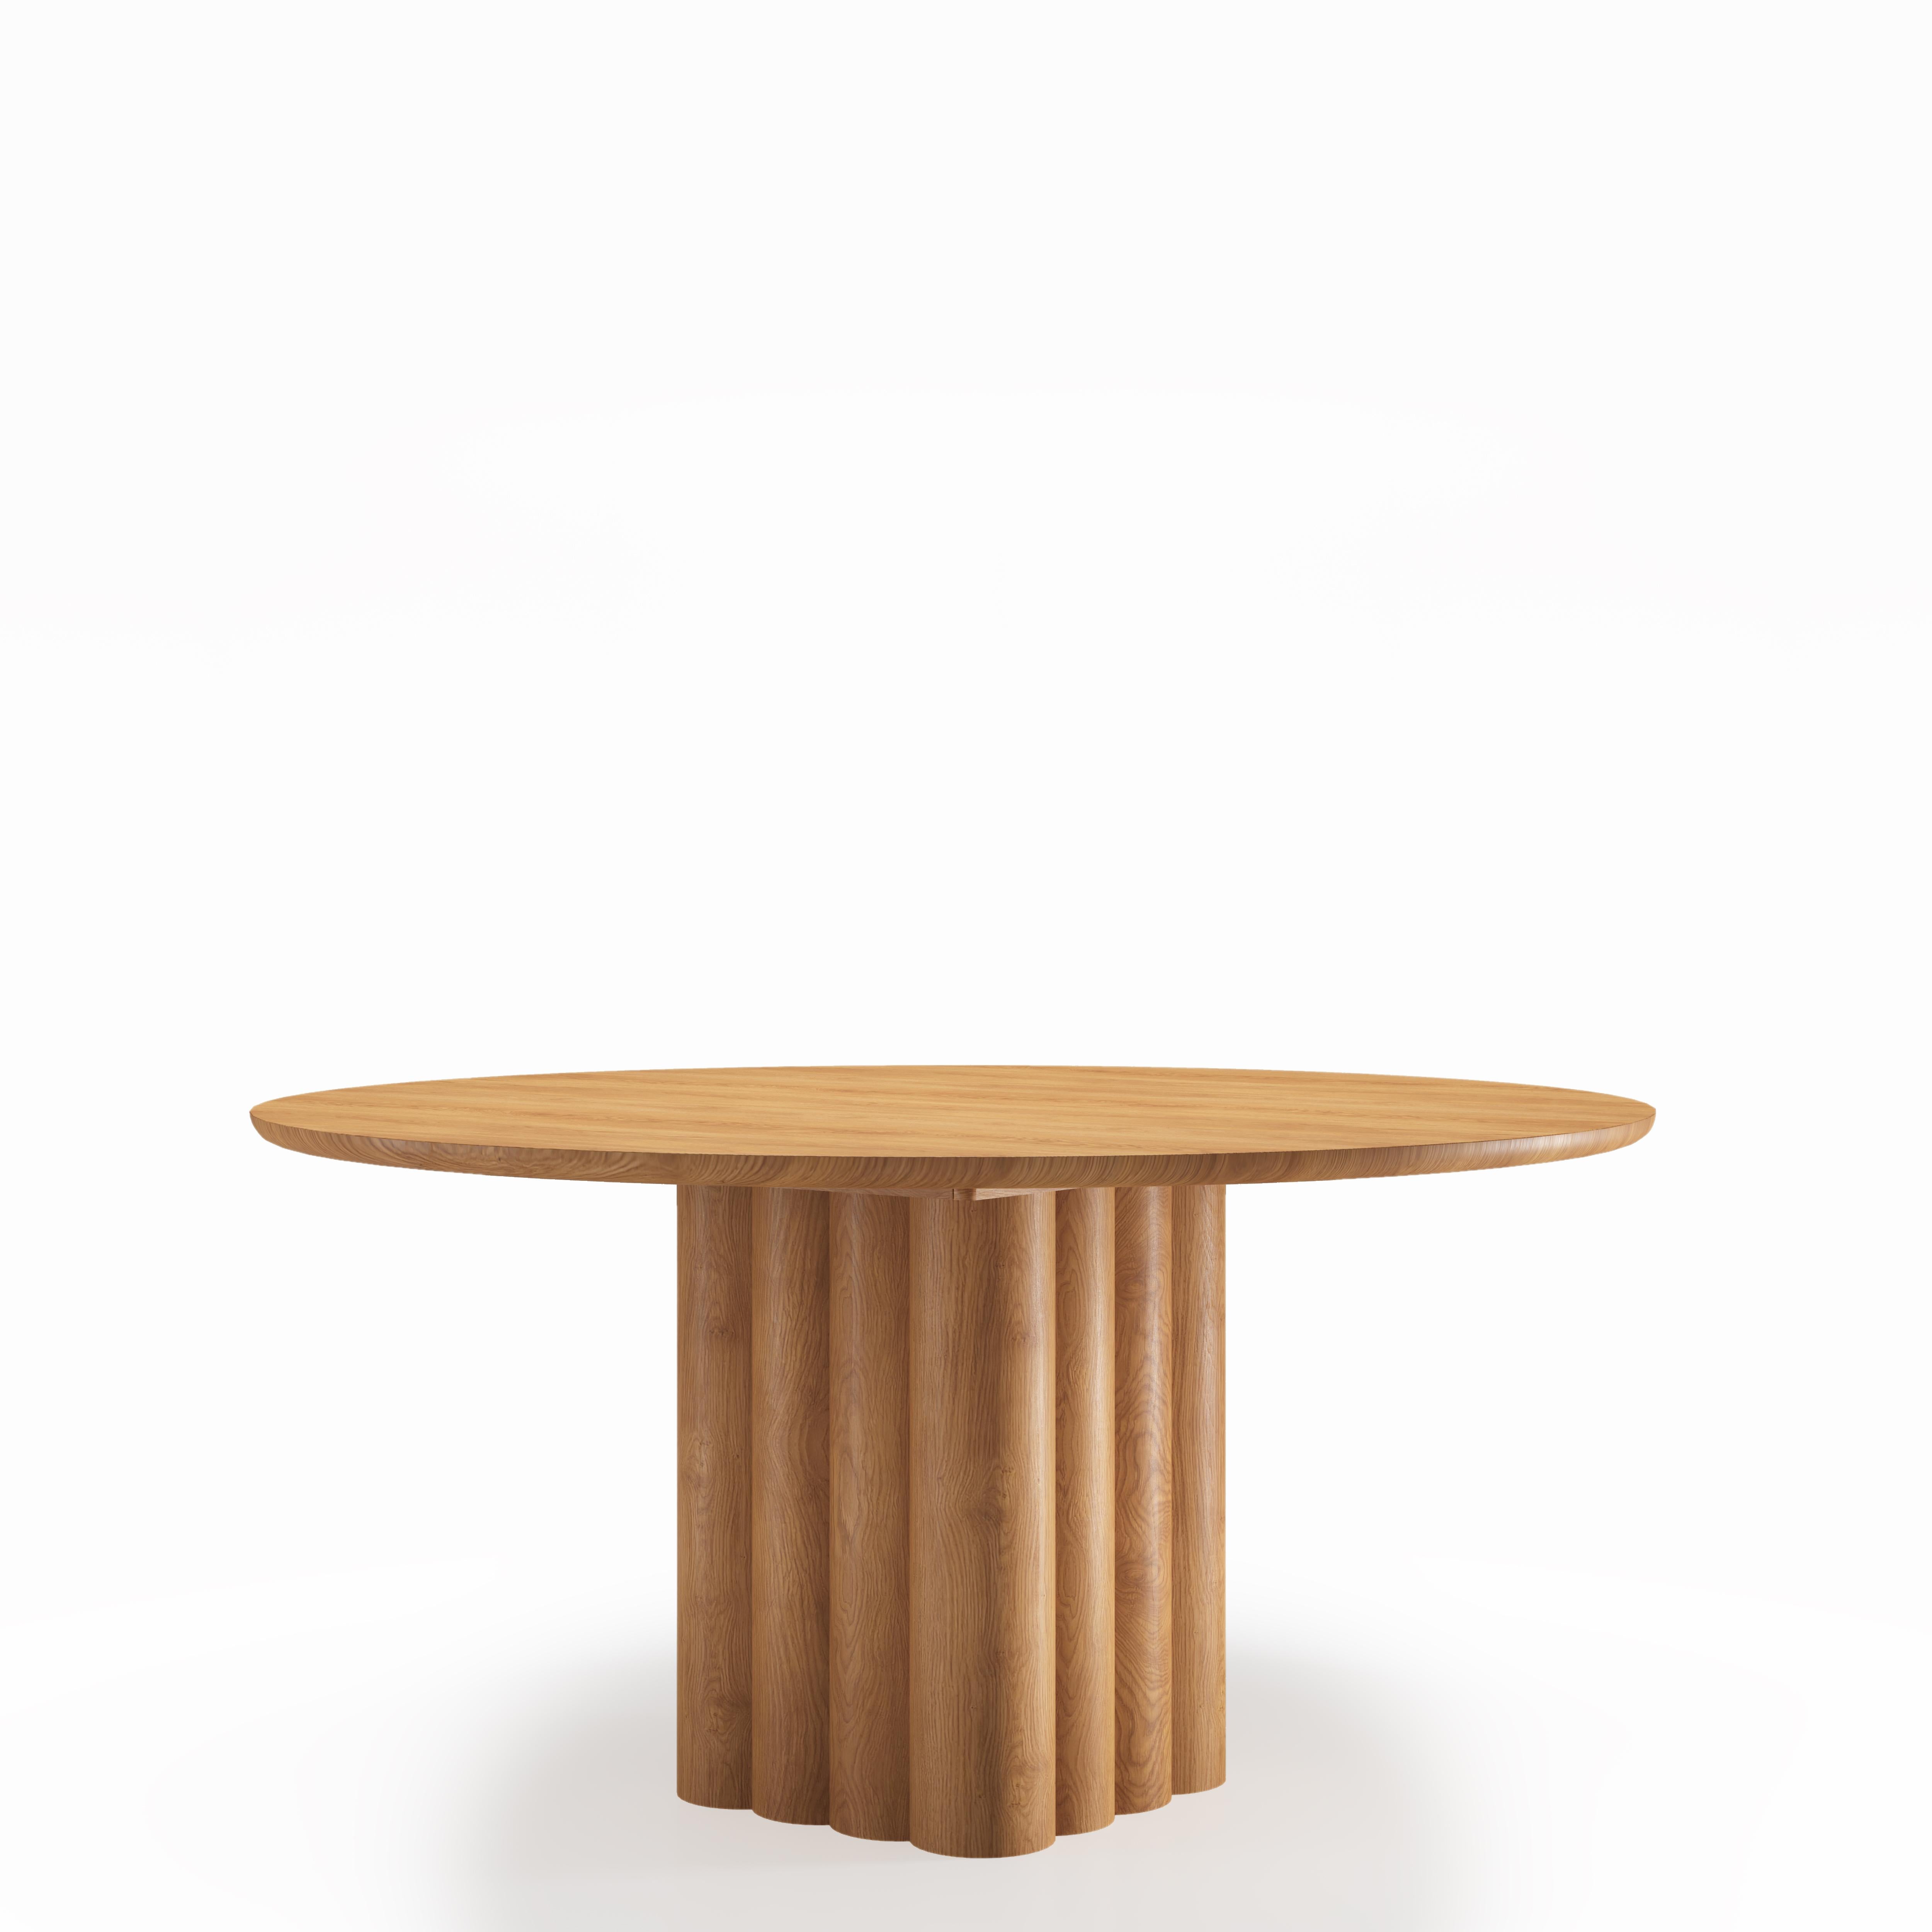 Round Dining Table 'Plush' by Dk3, Smoked Oak or Walnut, 150 cm For Sale 6